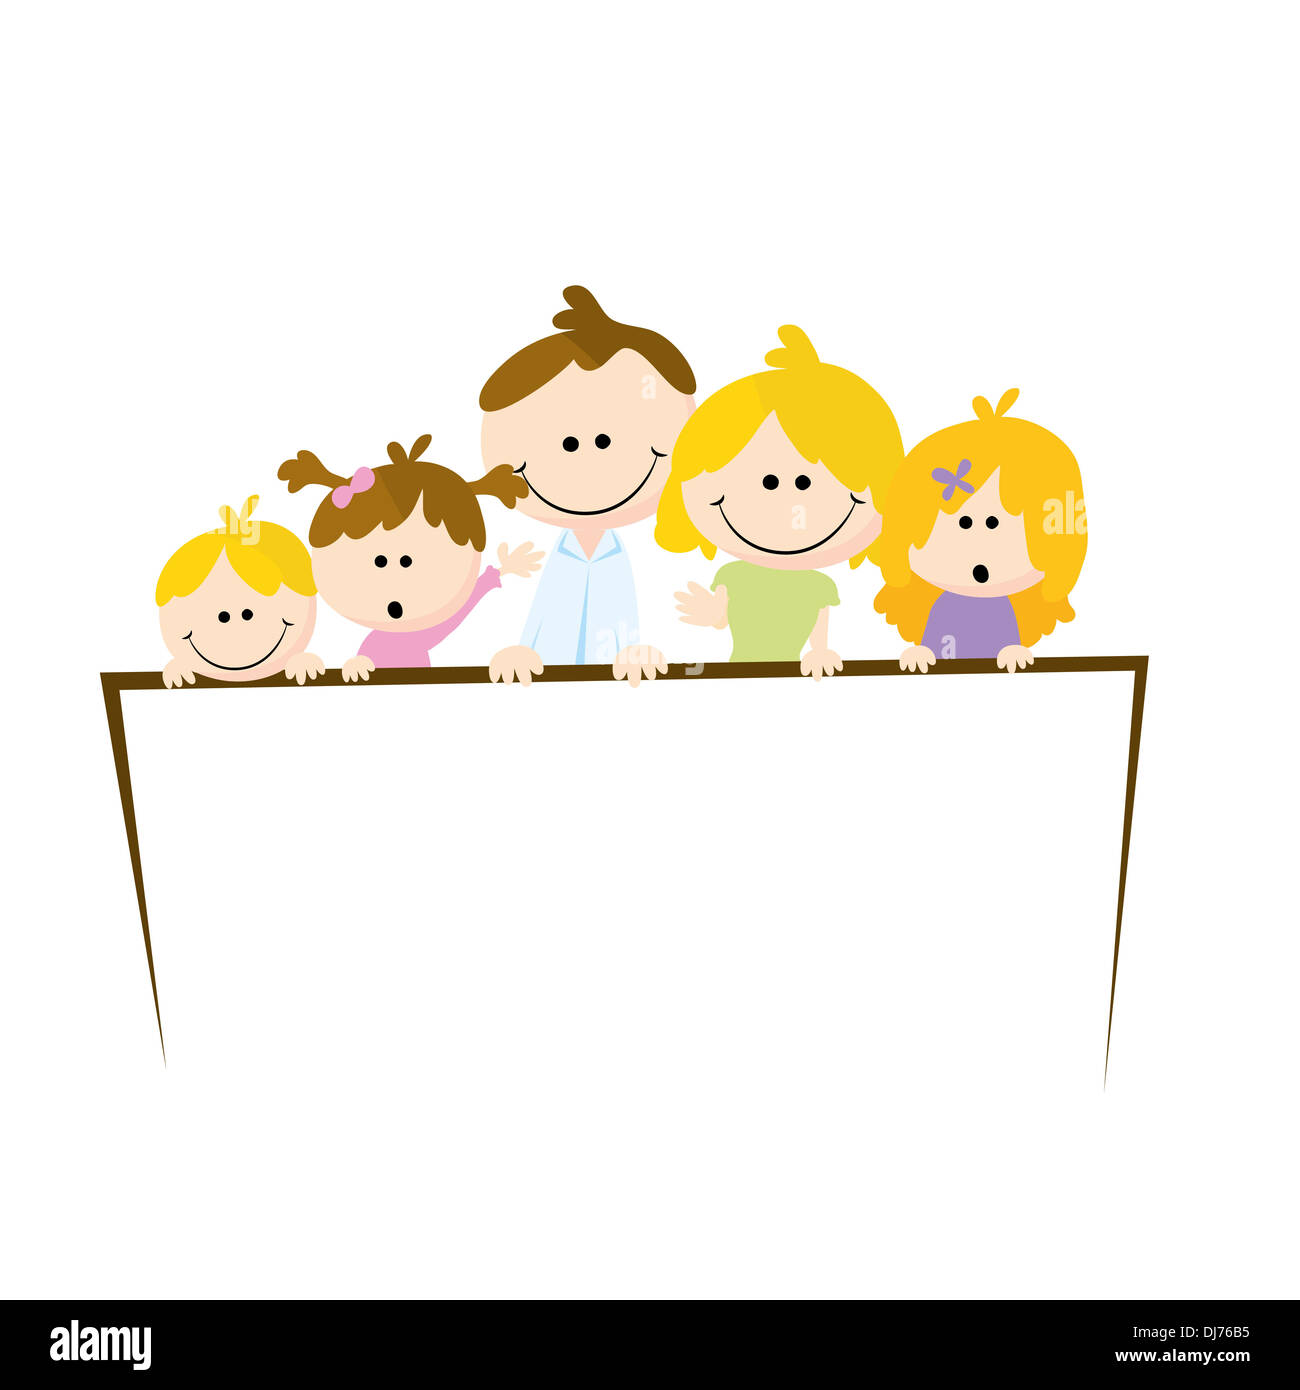 cute simple family cartoons of five people Stock Photo - Alamy